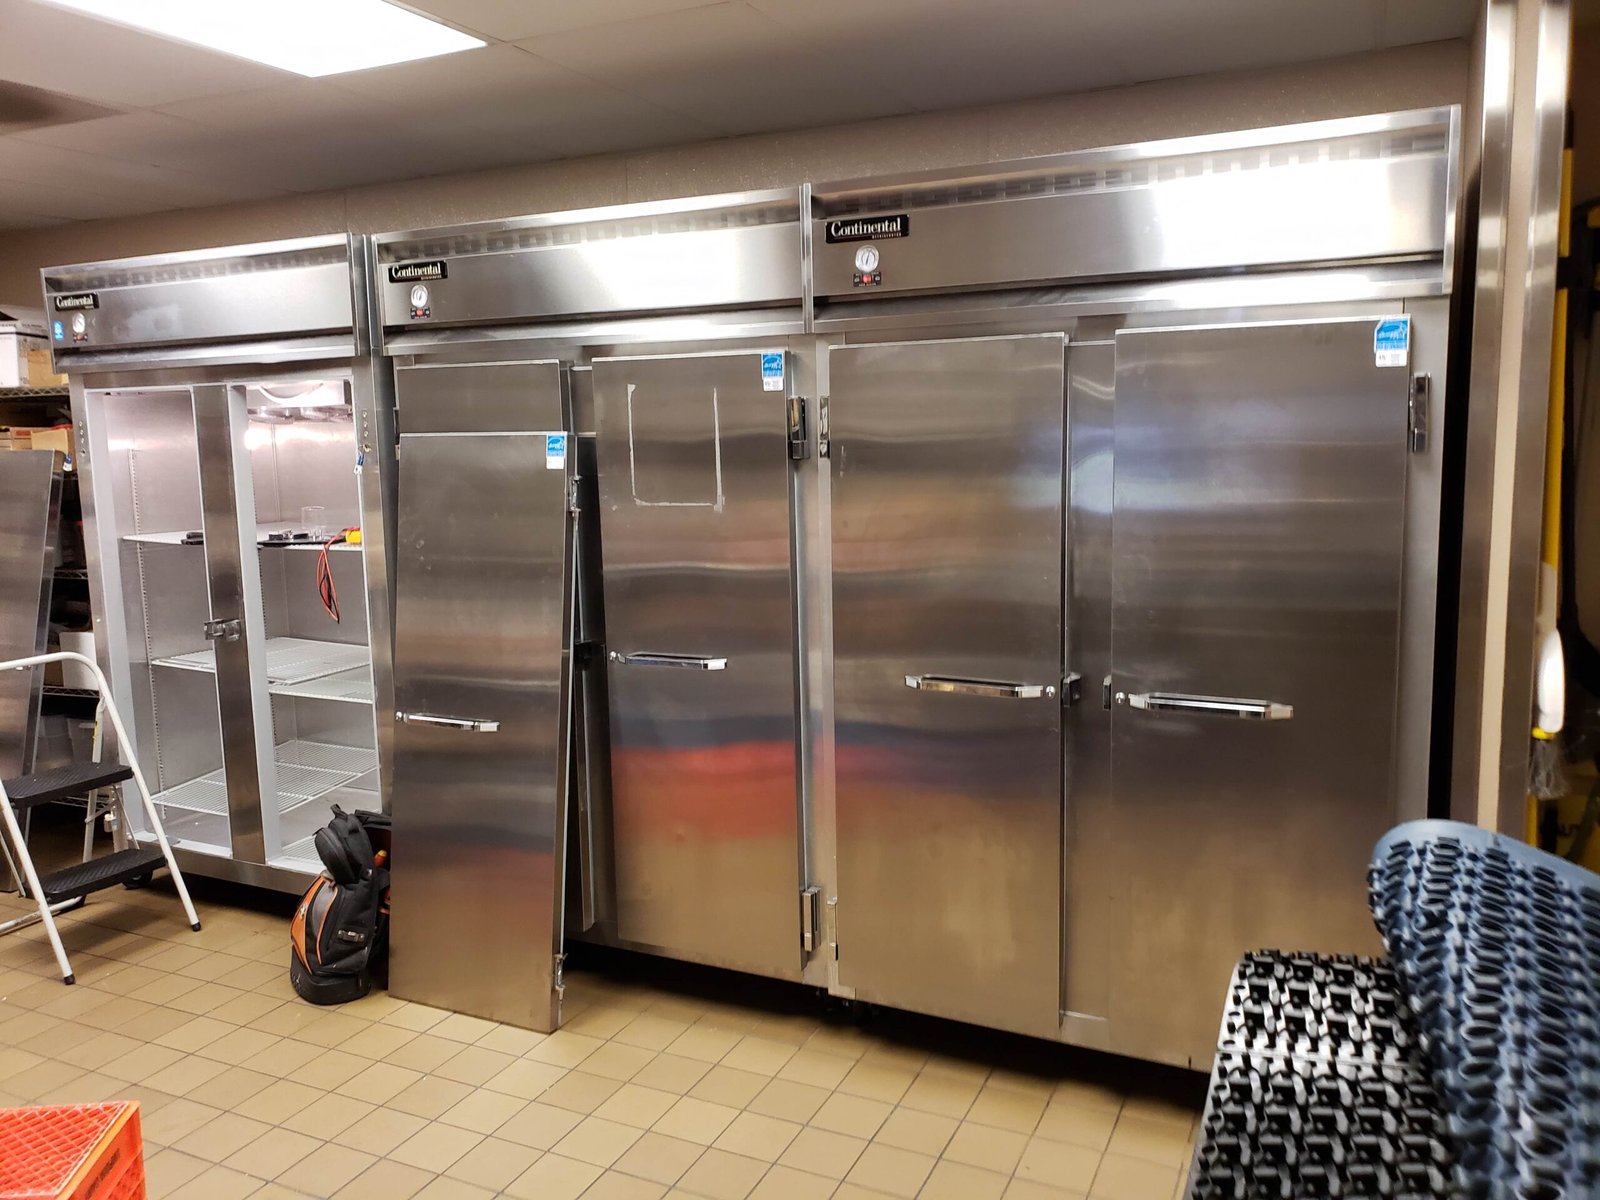 Four Reasons To Have Commercial Freezer Repair